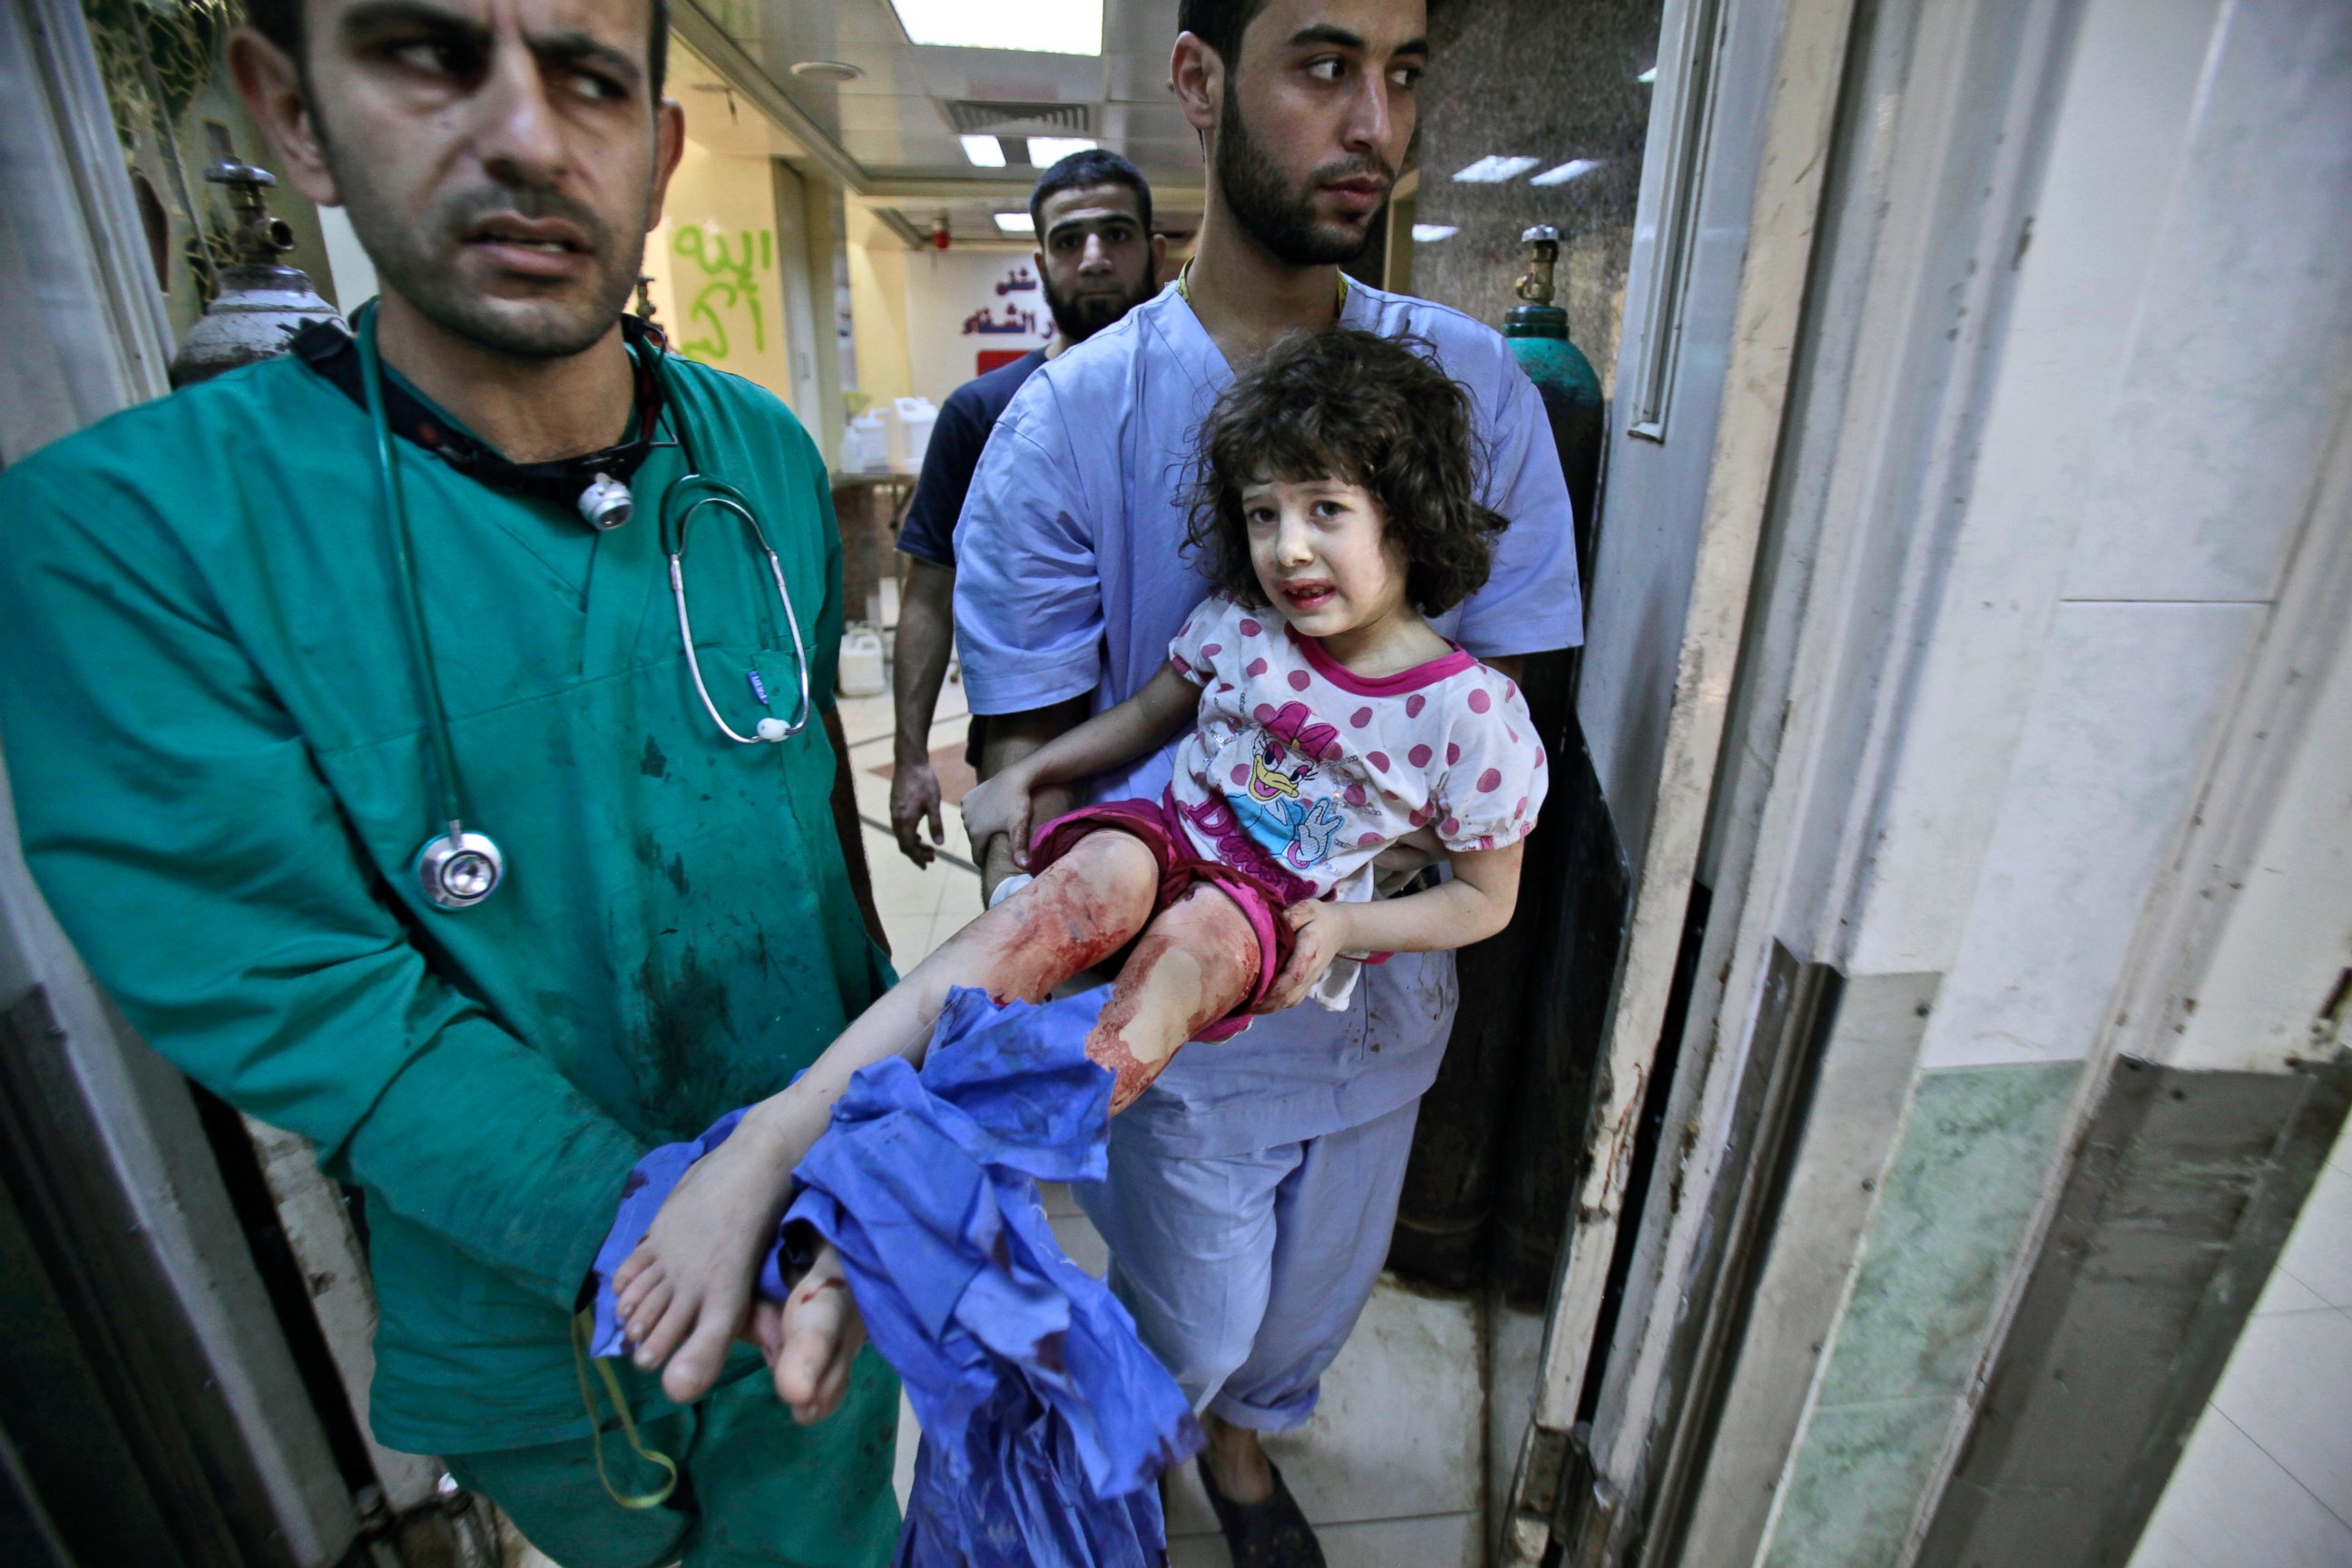 PHOTO: Medics carry Fatima Qassim, 6, who was badly injured in her legs after government forces fired on her family's car, to the emergency room in a hospital in Aleppo, Syria, Sept. 11, 2012. 